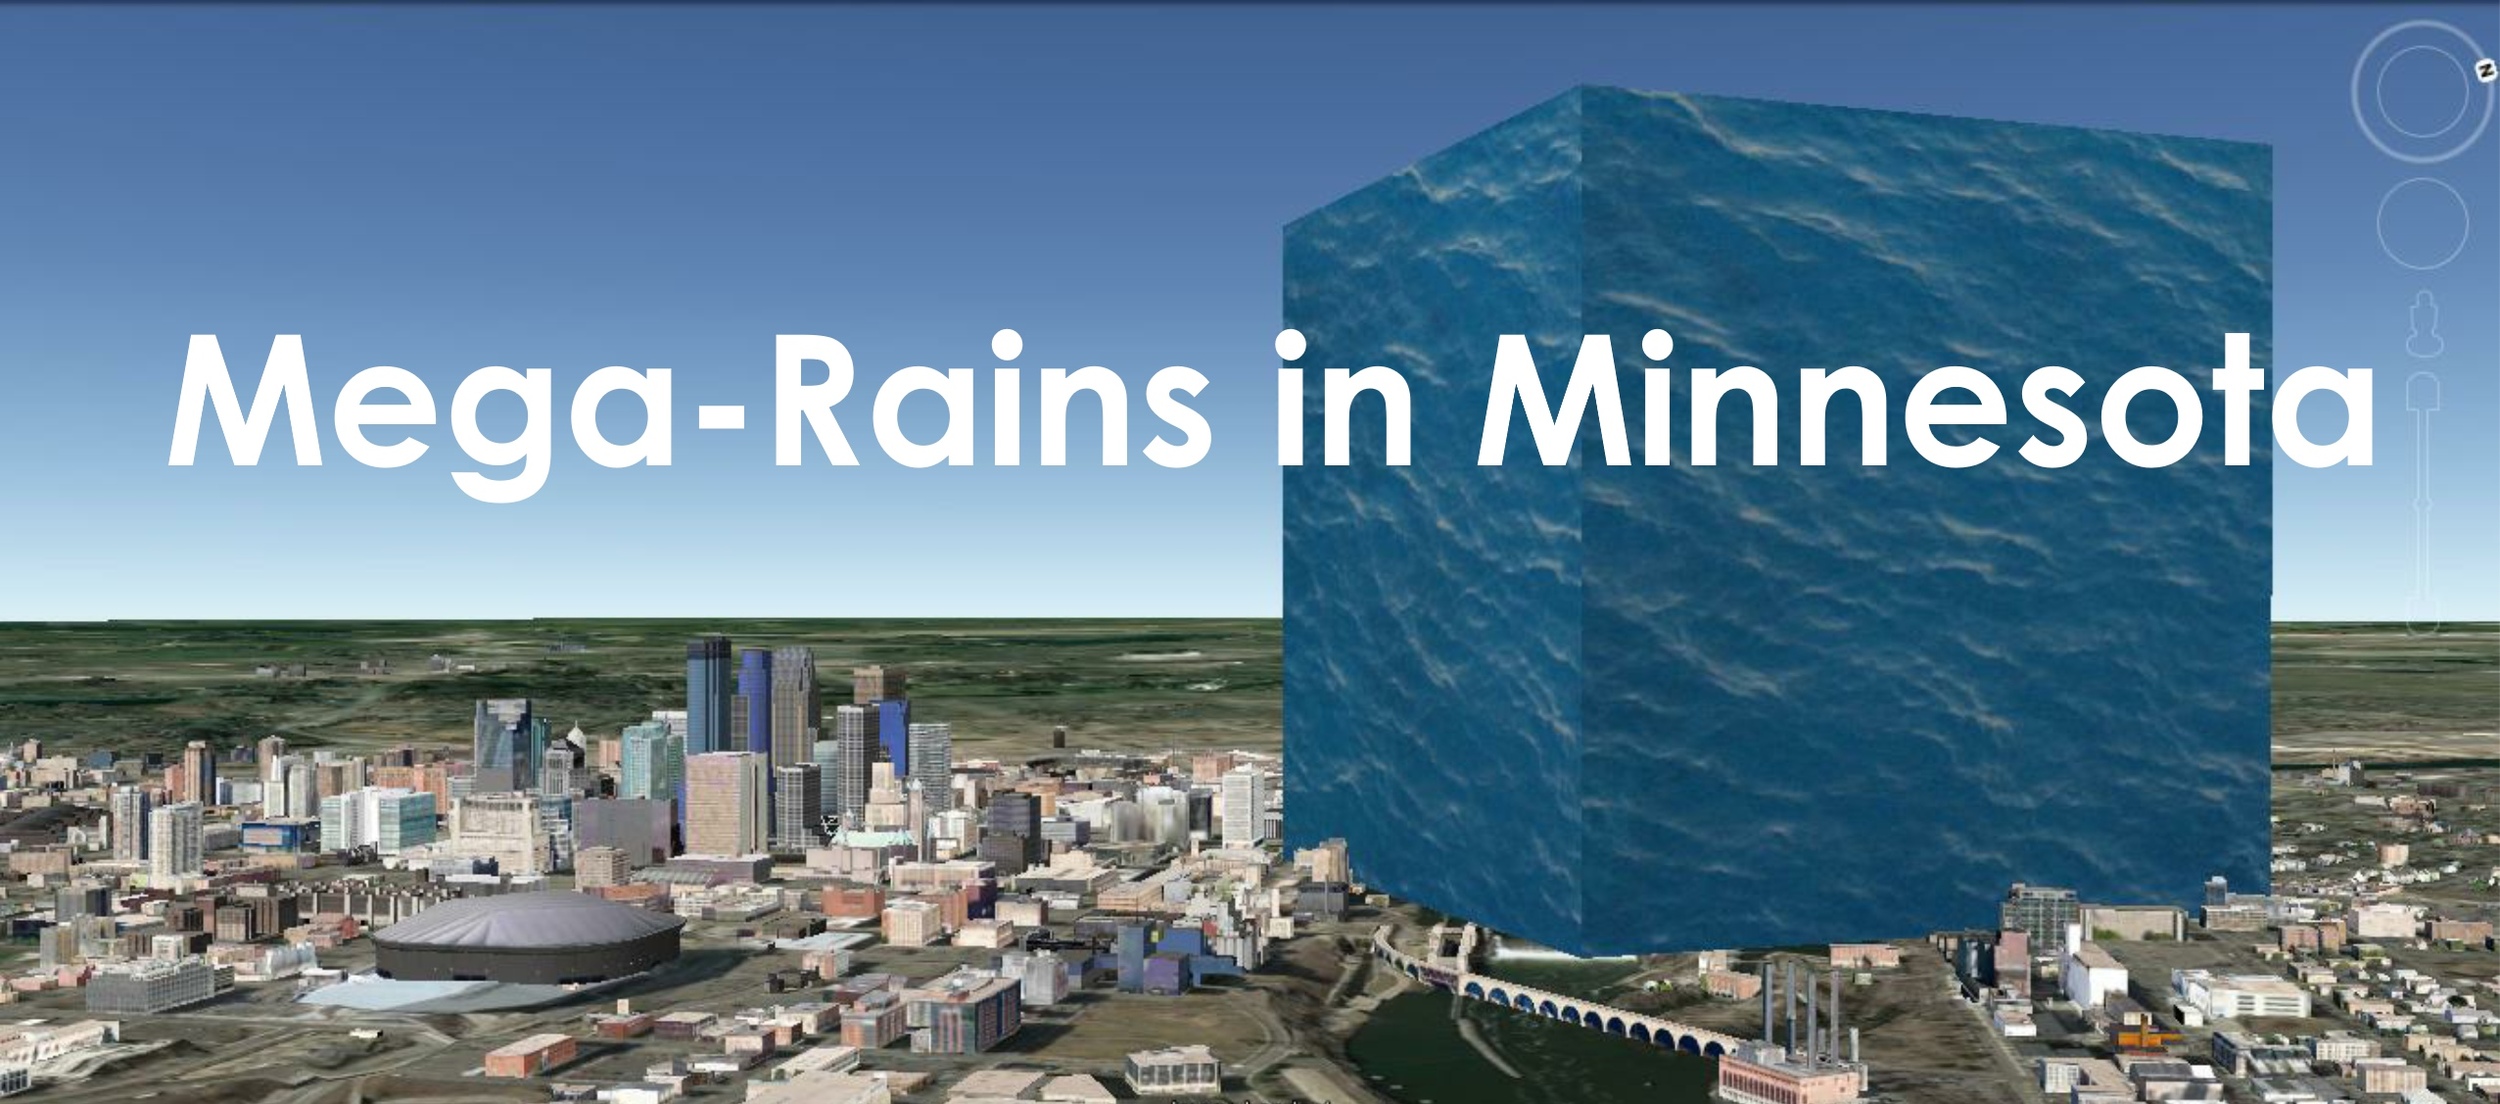  “The DNR climate office has assembled a list of so-called "Mega-rain" events that have occurred since statehood. These are events where a six-inch area covers more than 1000 square miles and the core of the event topped eight inches. Using newspaper